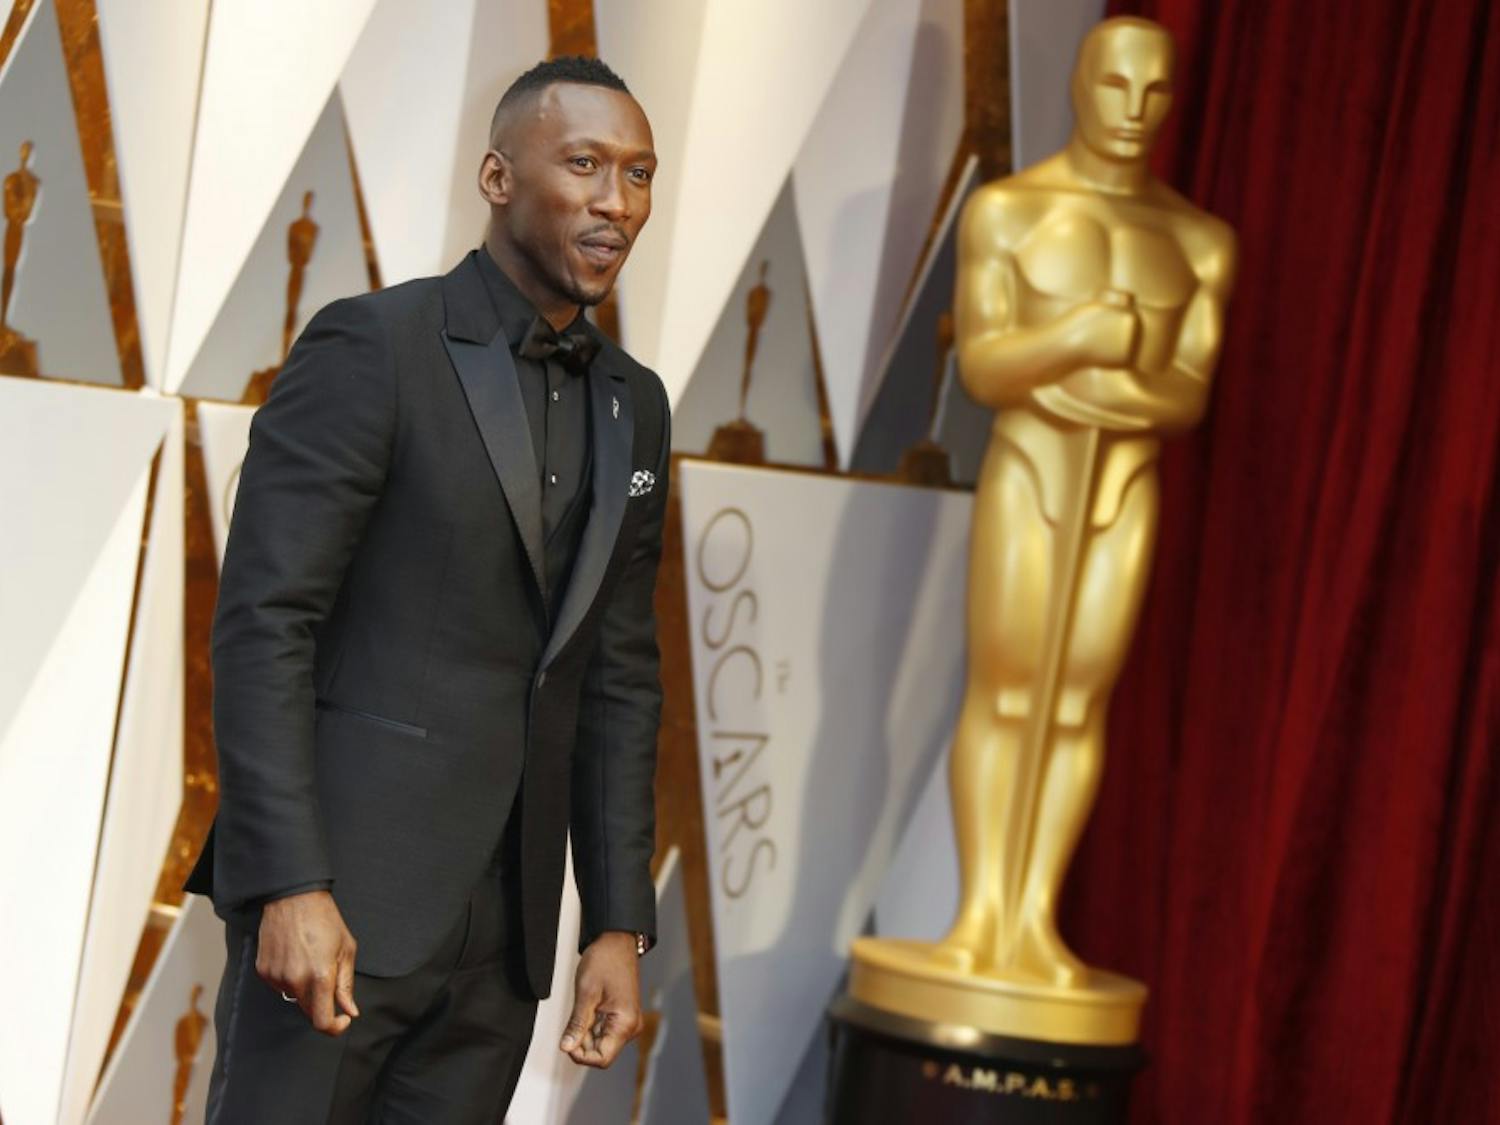 Mahershala Ali arrives at the 89th Academy Awards on Sunday, Feb. 26, 2017, at the Dolby Theatre at Hollywood & Highland Center in Hollywood. (Jay L. Clendenin/Los Angeles Times/TNS)